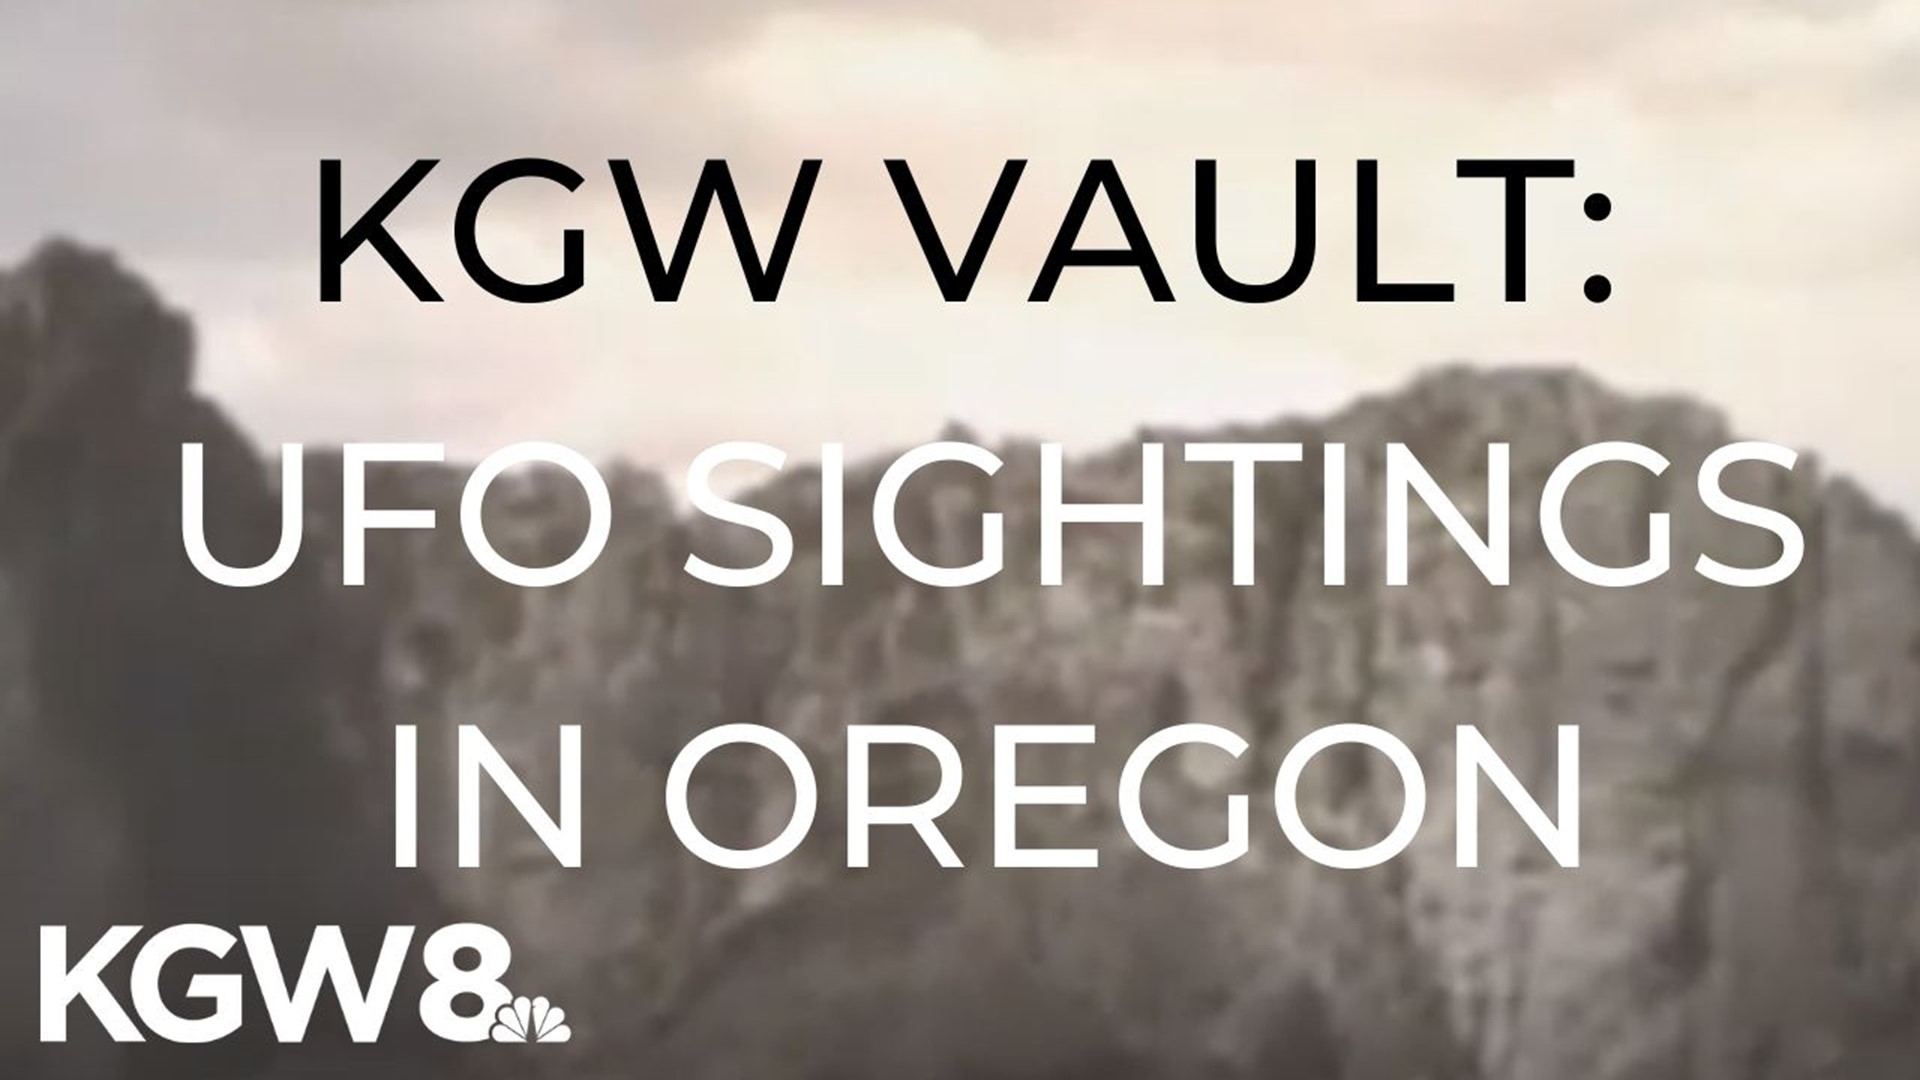 In the 50's, KGW aired a weekly show called "Space Report".. And of course, we dug around the KGW vault for this episode from 1959.